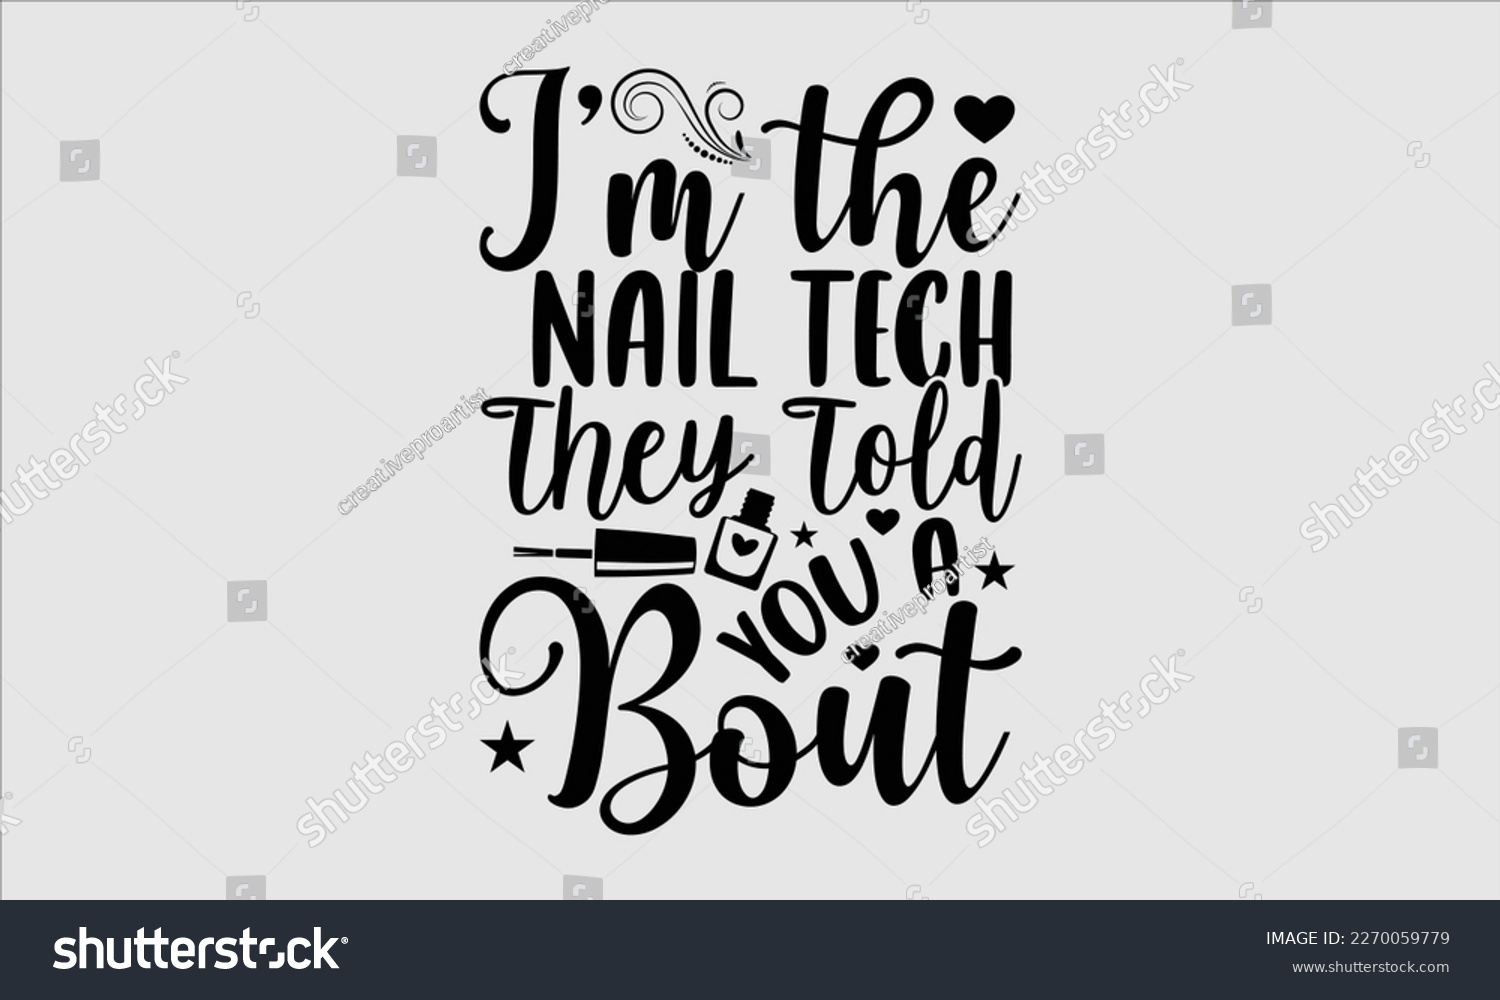 SVG of I’m the nail tech they told you a bout- Nail Tech t shirts design, Hand written lettering phrase, Isolated on white background,  Calligraphy graphic for Cutting Machine, svg eps 10. svg